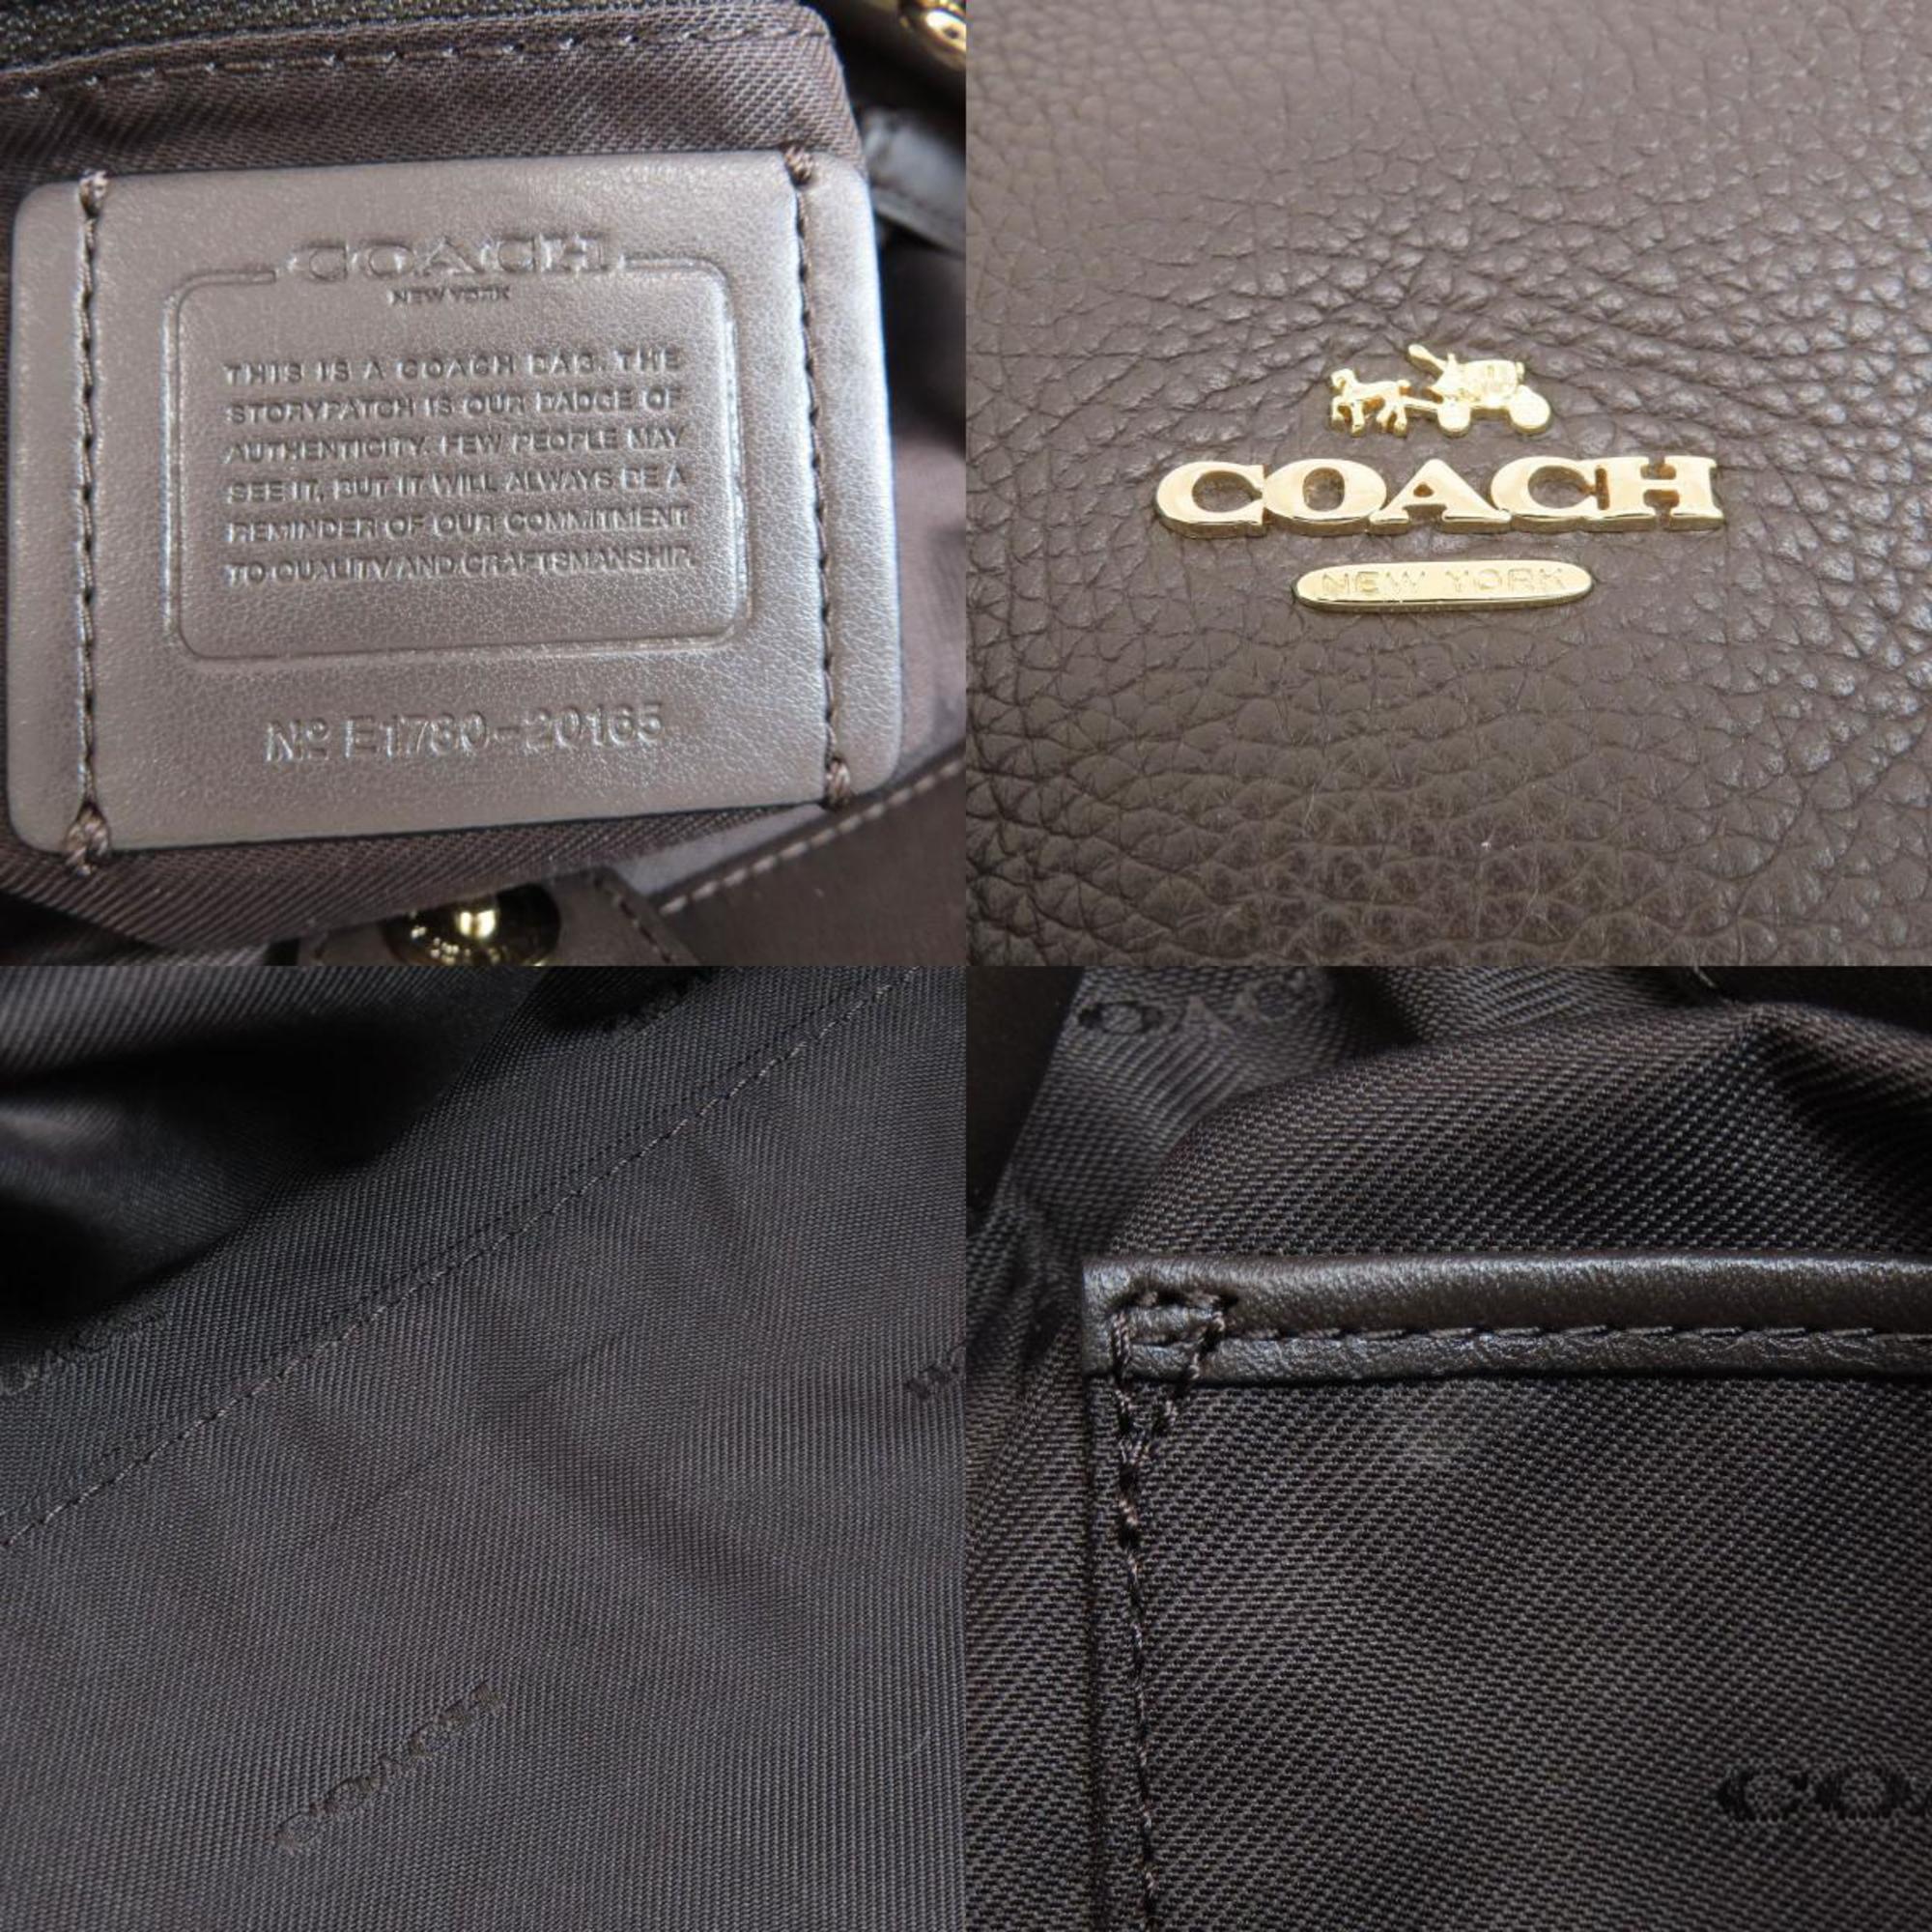 Coach 20165 Tote Bag Leather Women's